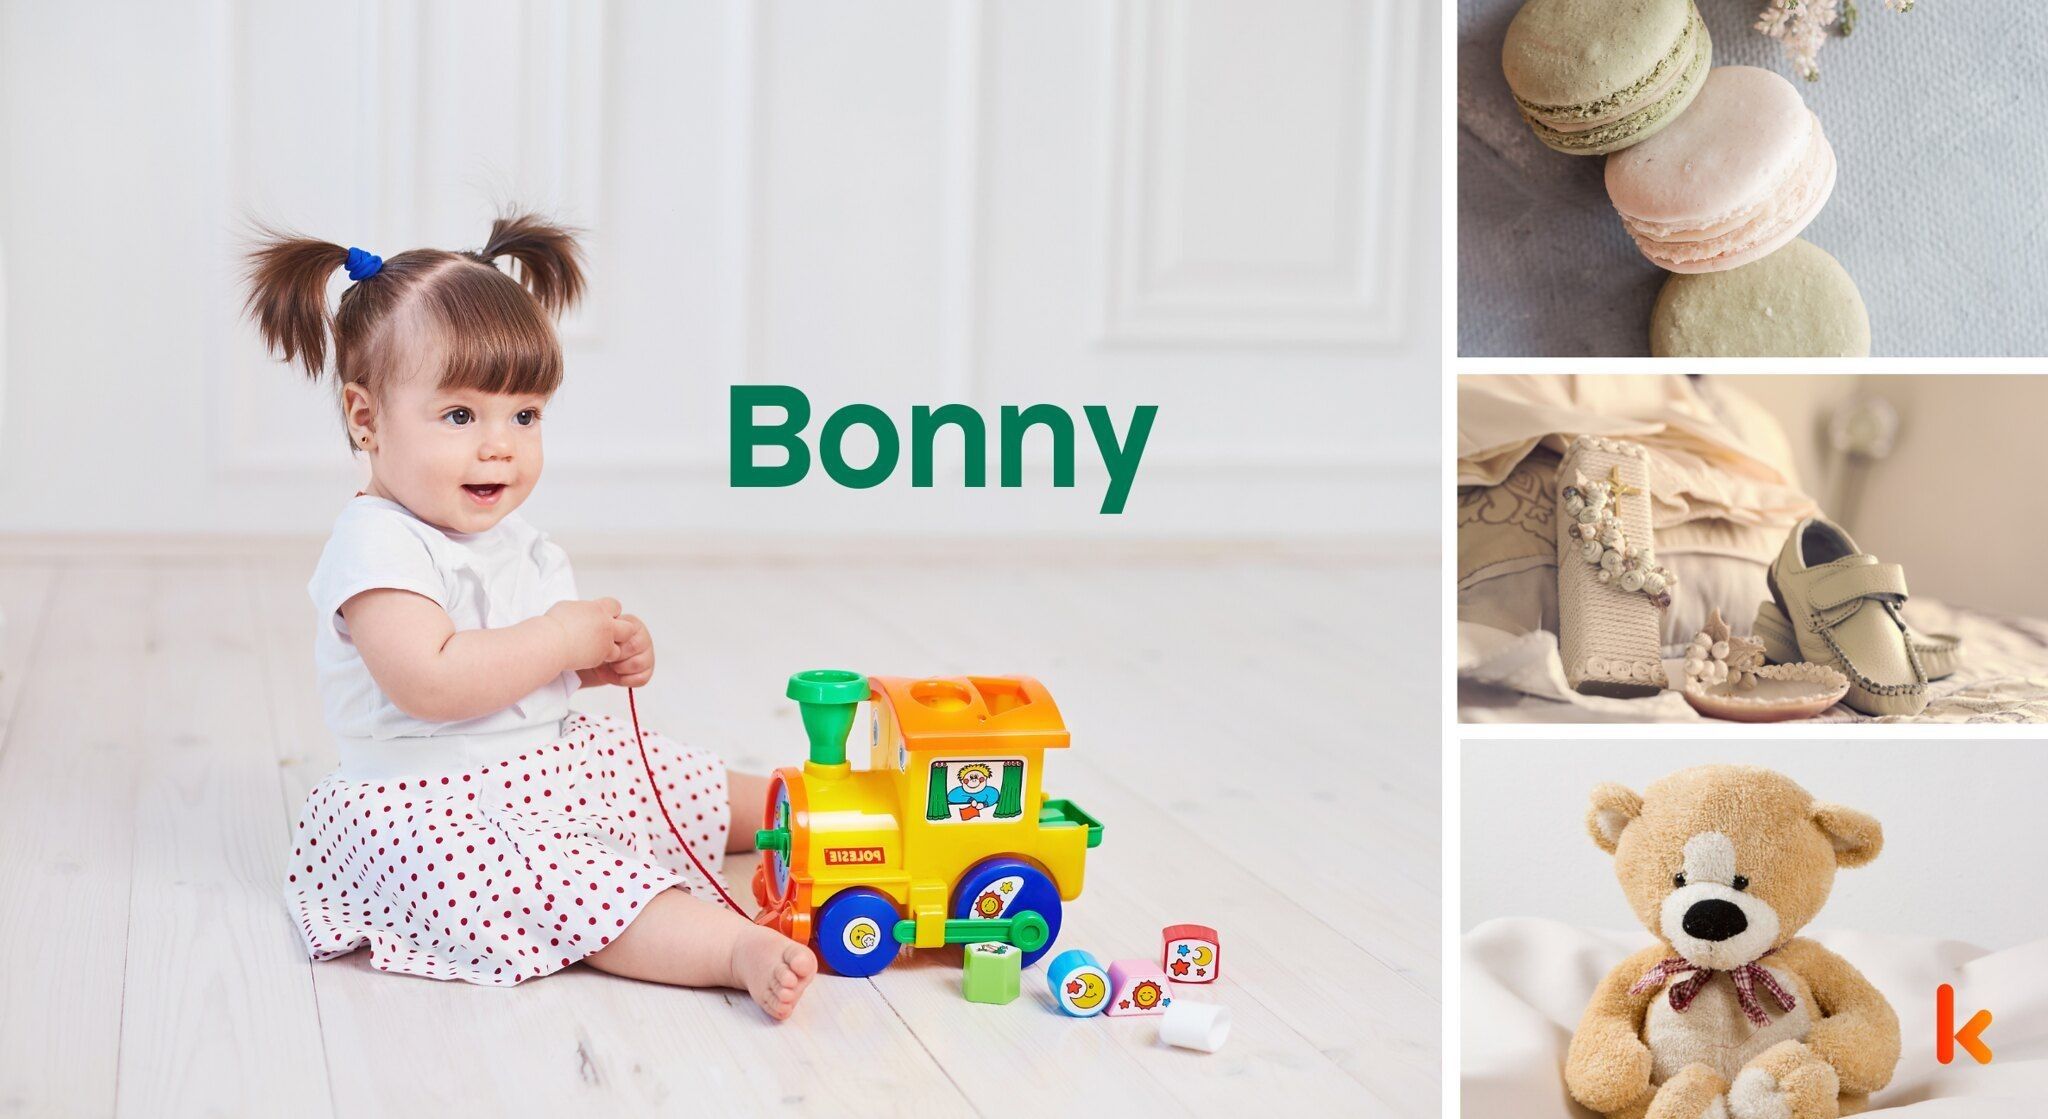 Meaning of the name Bonny